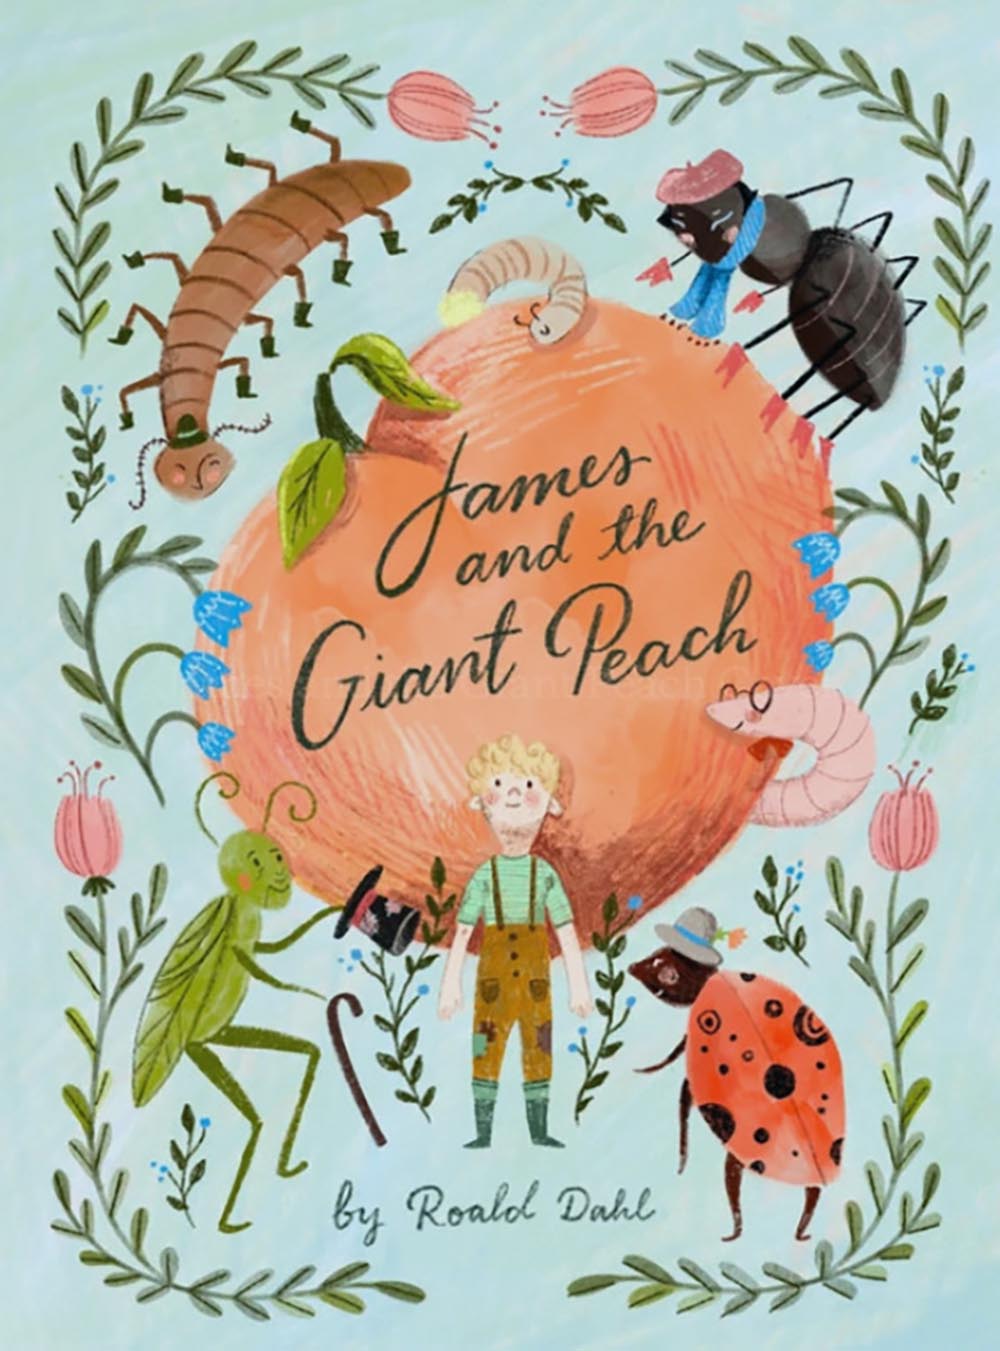 illustrated cover of James and the Giant Peach